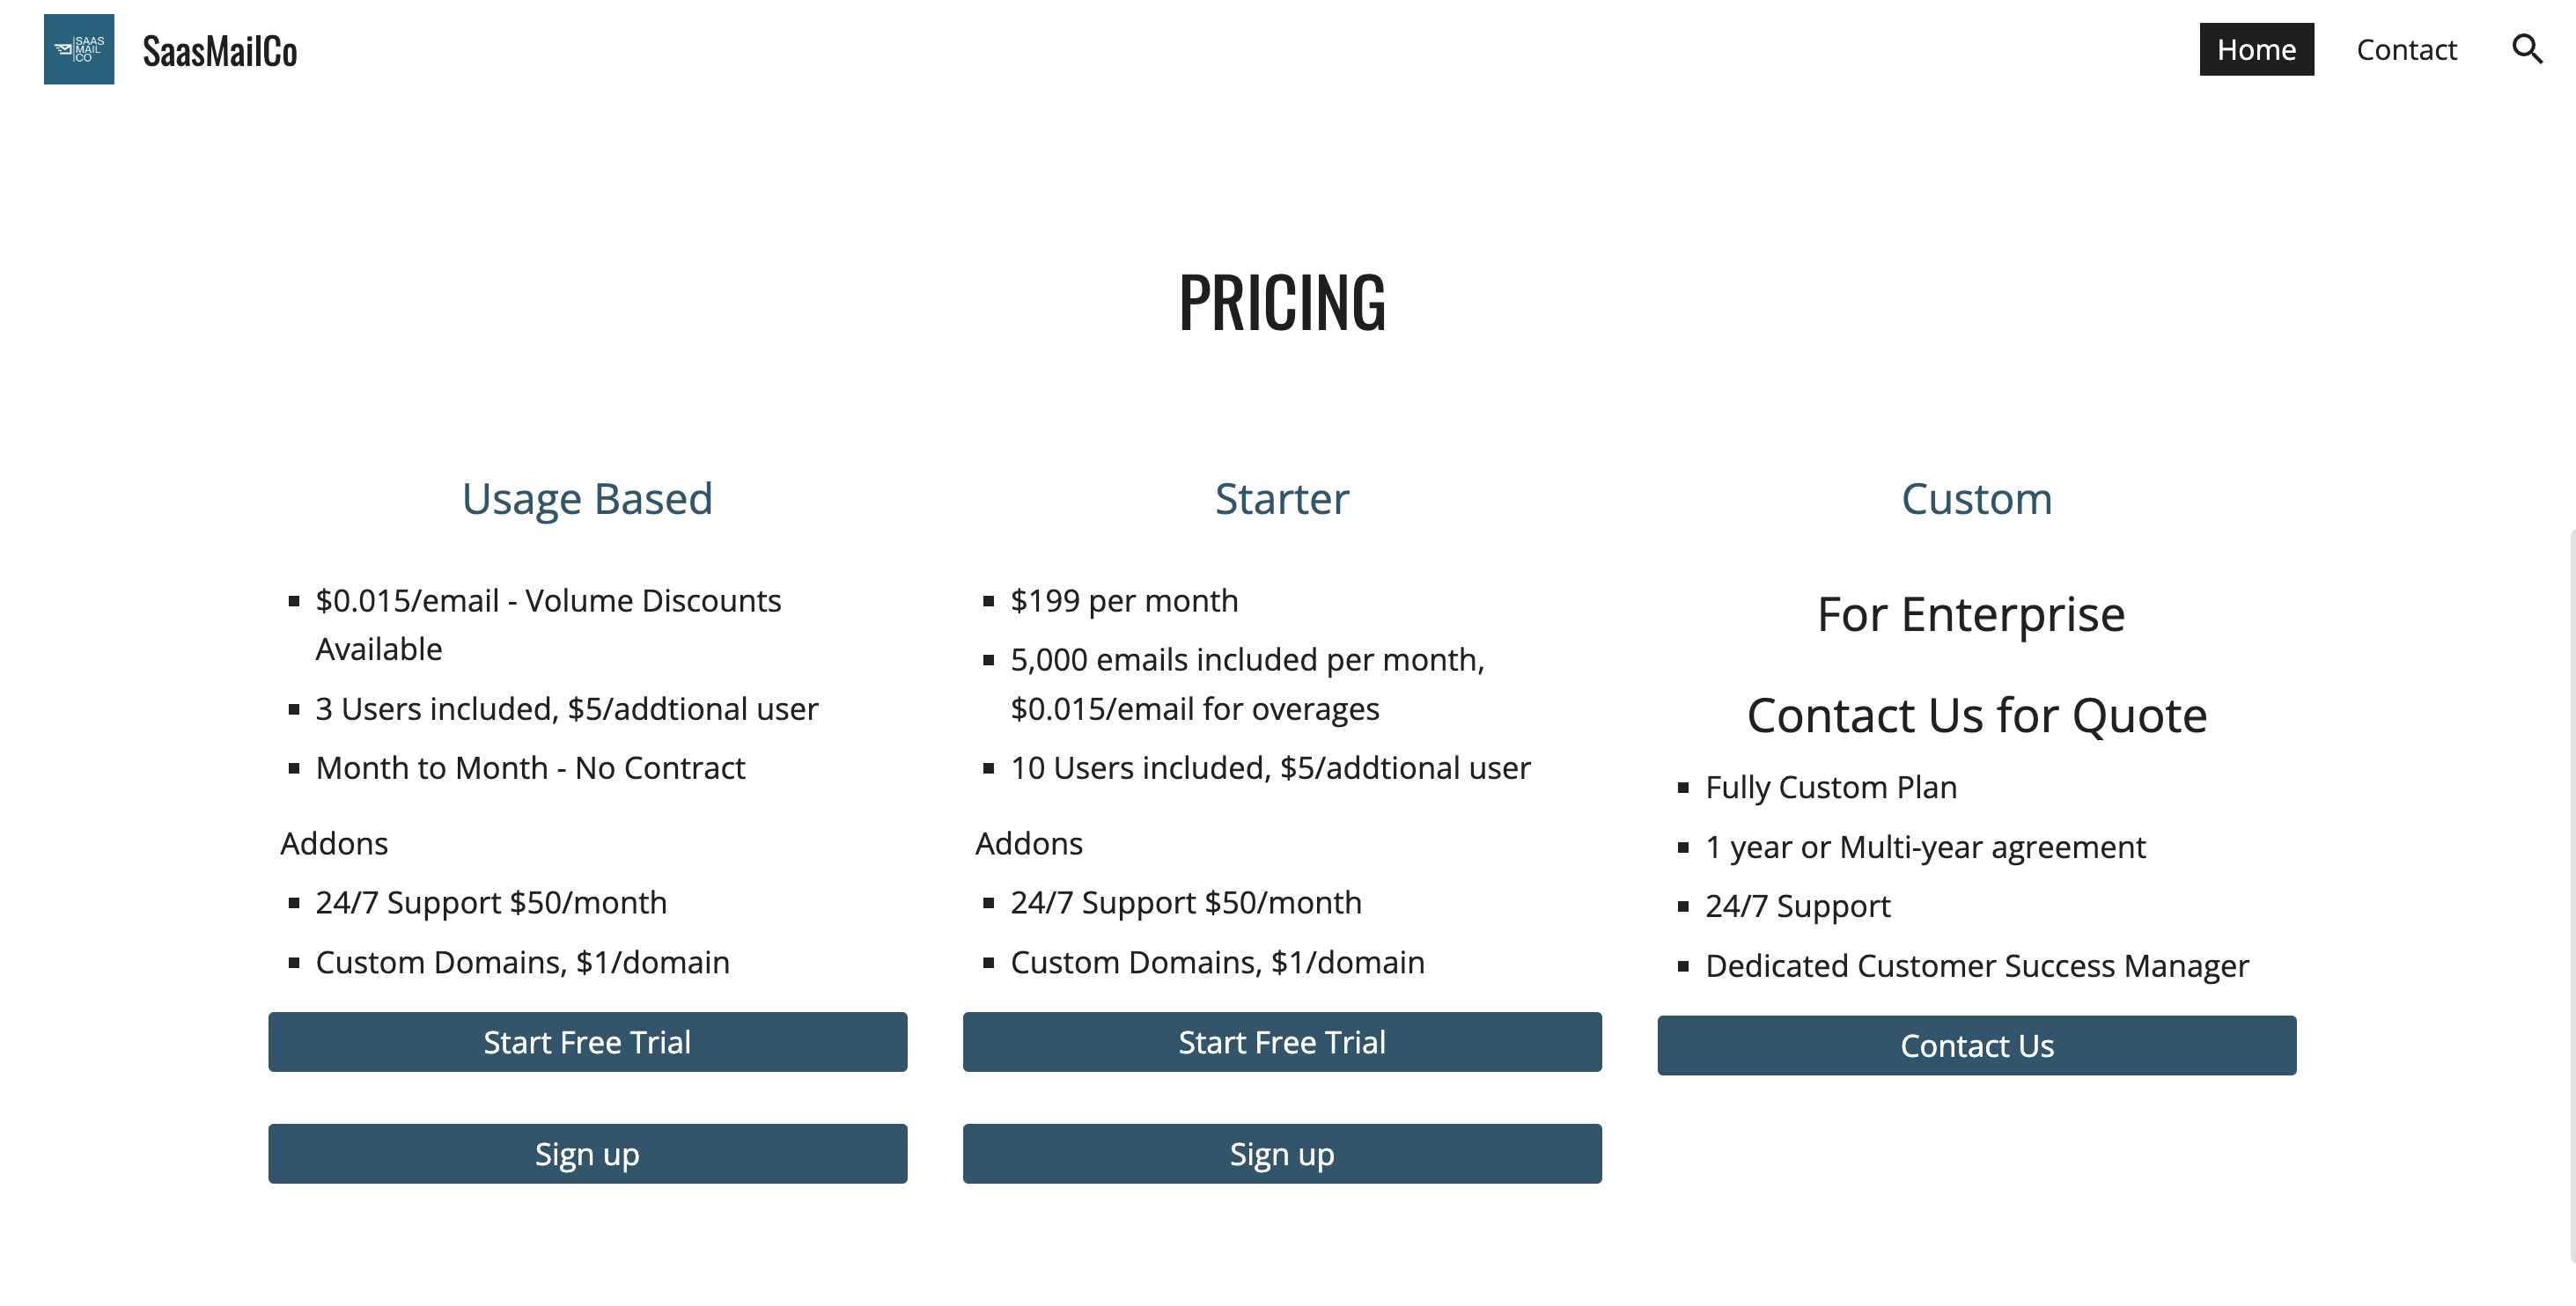 An image of a fictional SaaS company's pricing page